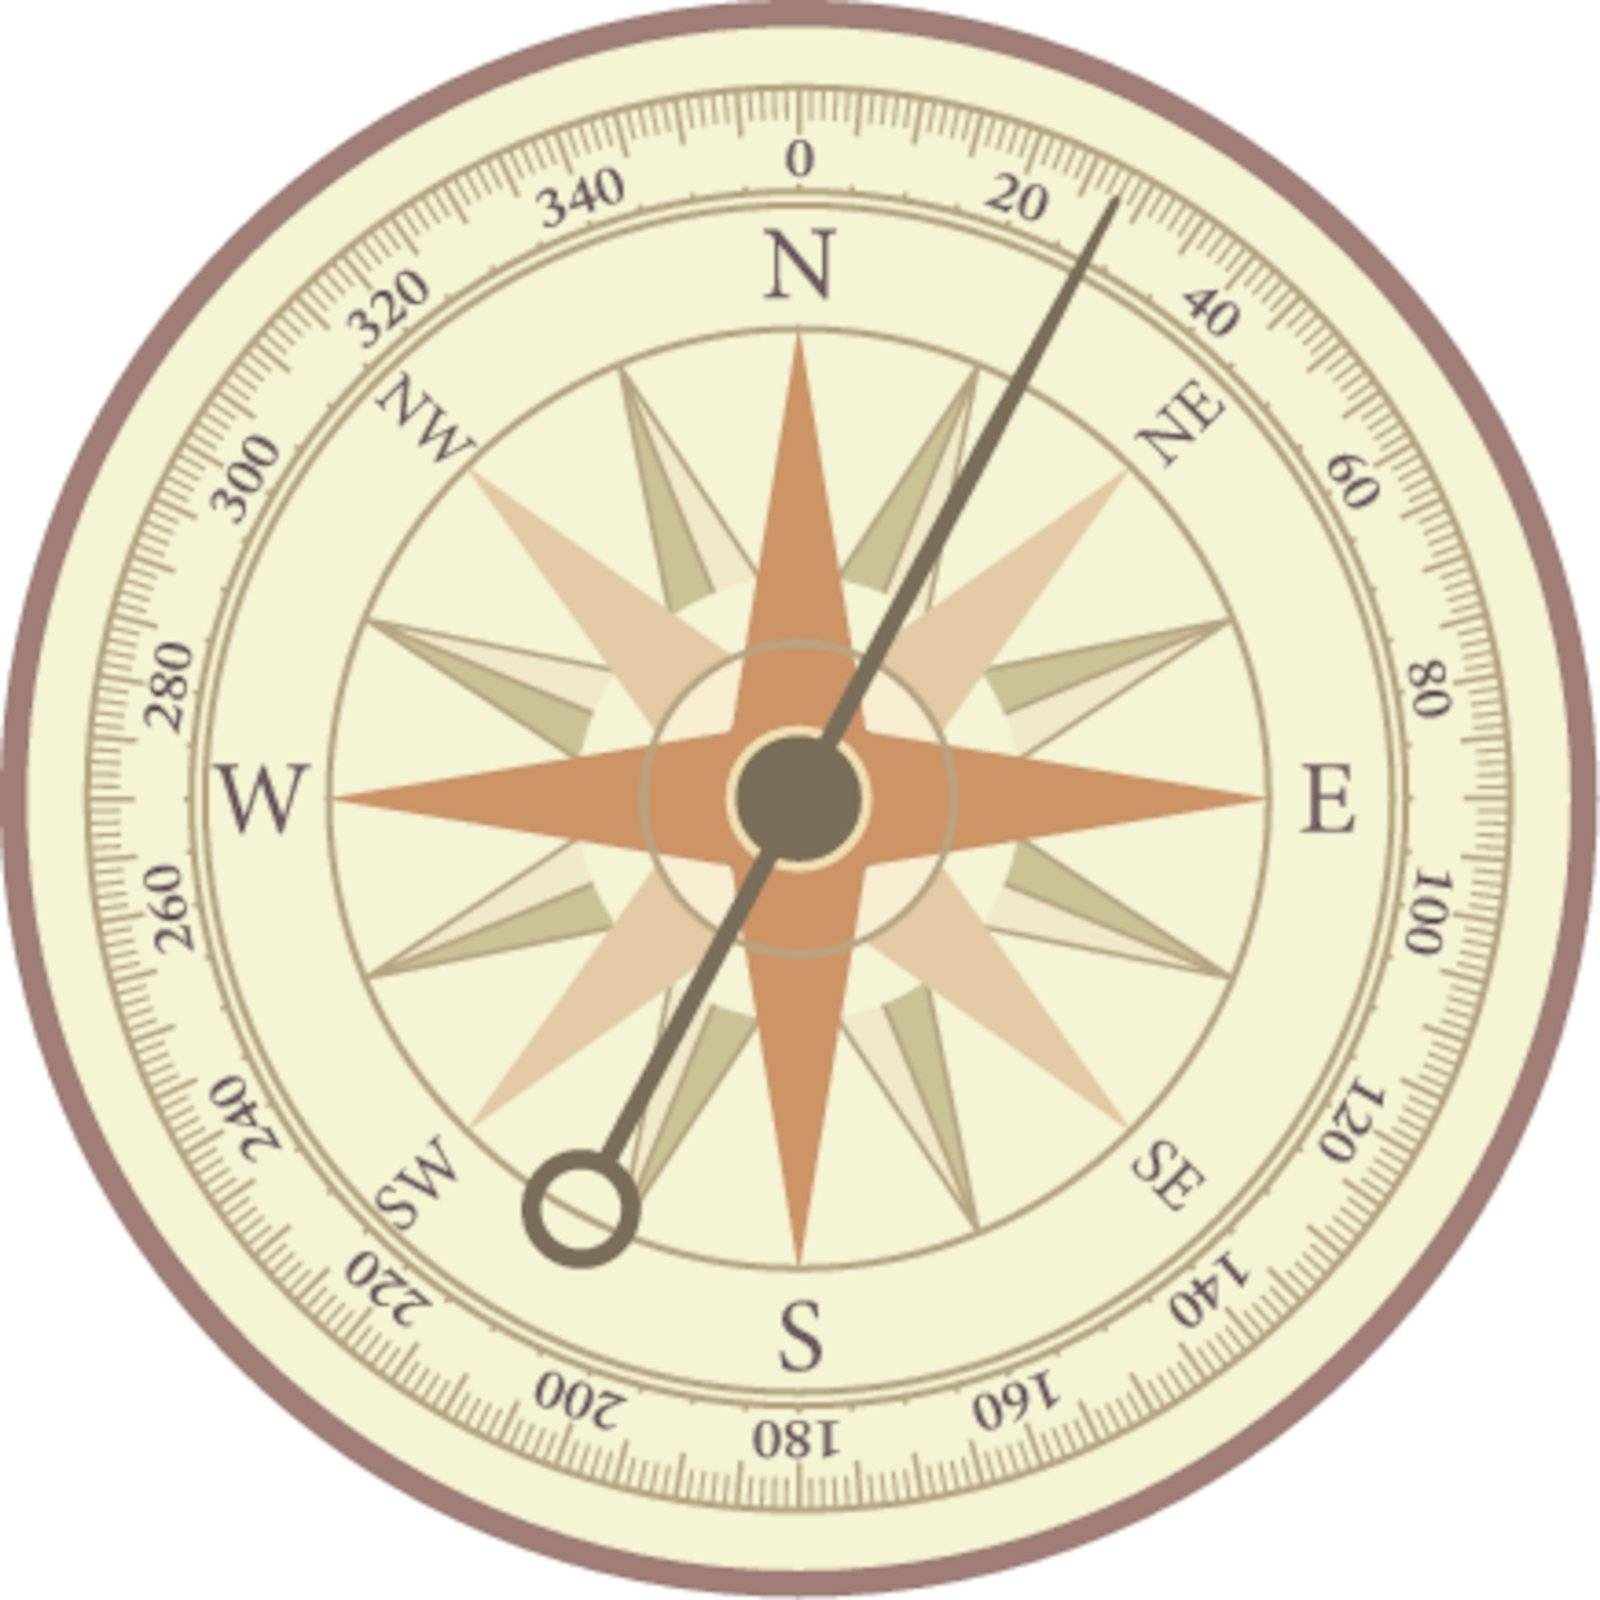 Oldstyle sea compass with wind rose